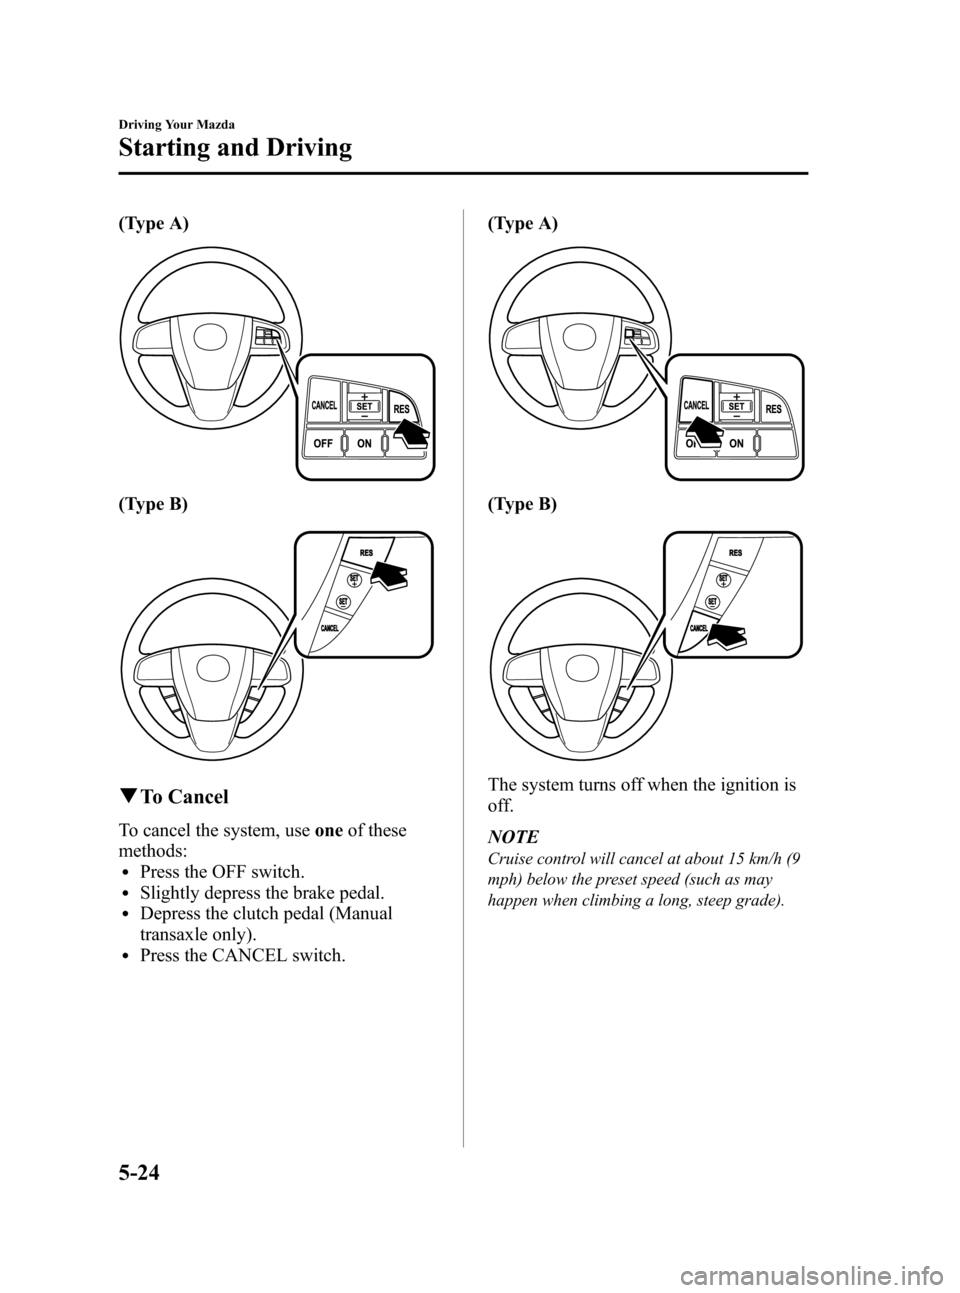 MAZDA MODEL 3 HATCHBACK 2010  Owners Manual (in English) Black plate (180,1)
(Type A)
(Type B)
qTo Cancel
To cancel the system, useoneof these
methods:
lPress the OFF switch.lSlightly depress the brake pedal.lDepress the clutch pedal (Manual
transaxle only)